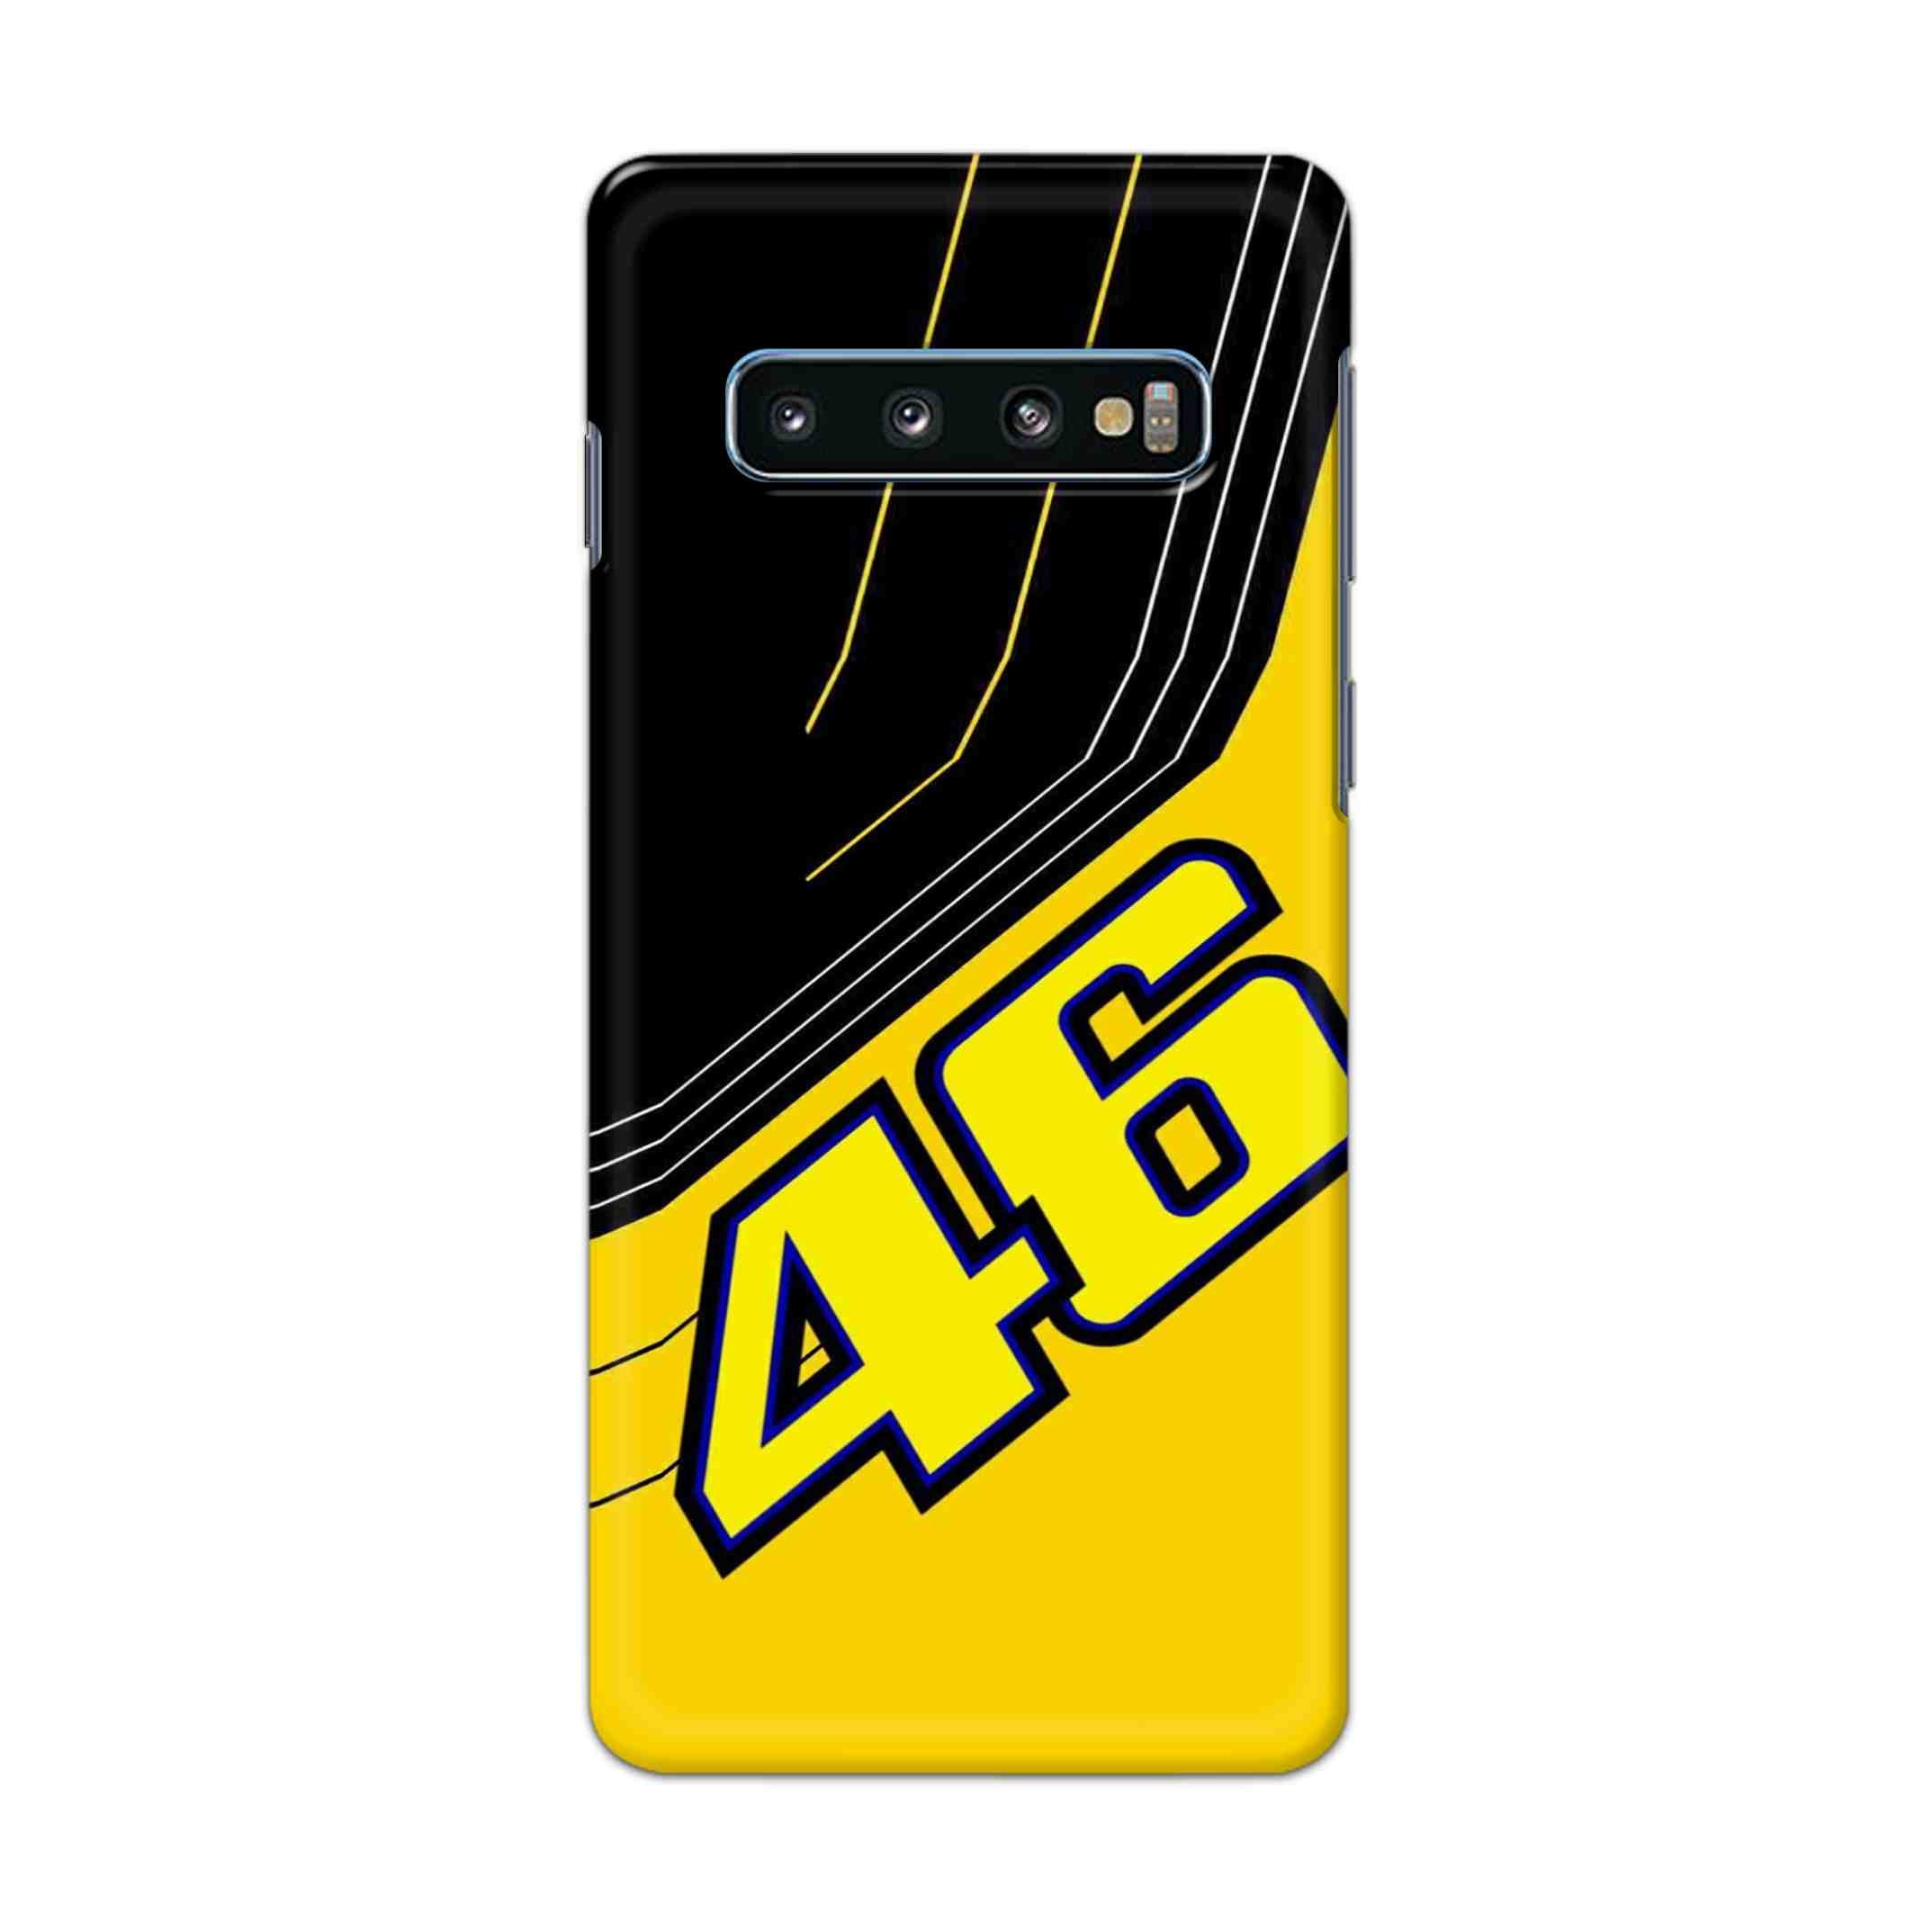 Buy 46 Hard Back Mobile Phone Case Cover For Samsung Galaxy S10 Plus Online